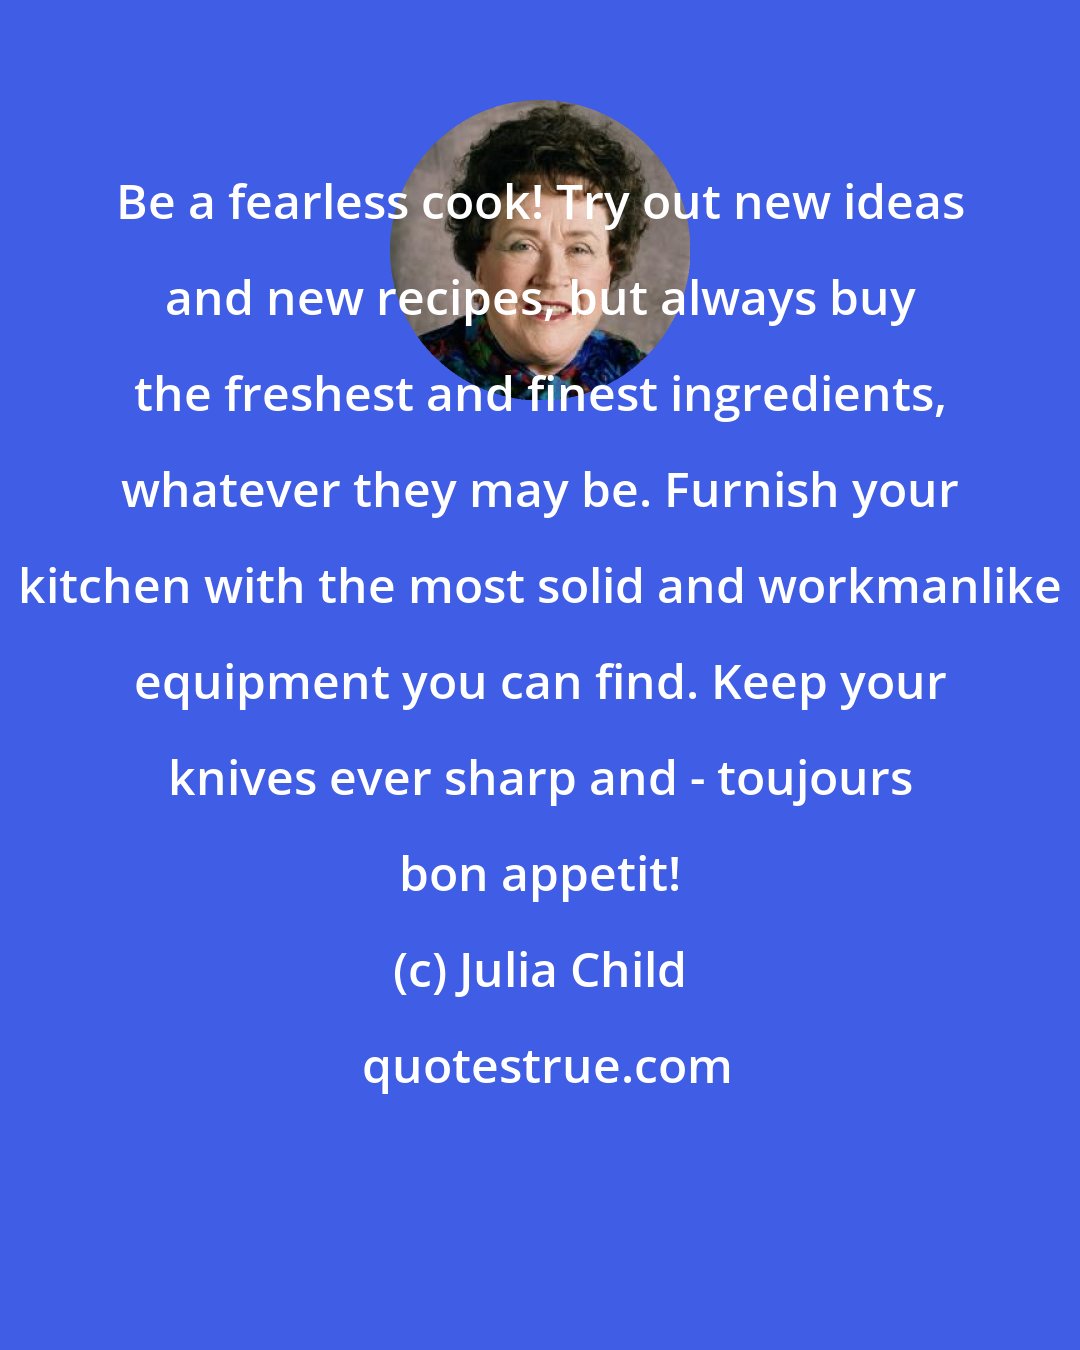 Julia Child: Be a fearless cook! Try out new ideas and new recipes, but always buy the freshest and finest ingredients, whatever they may be. Furnish your kitchen with the most solid and workmanlike equipment you can find. Keep your knives ever sharp and - toujours bon appetit!